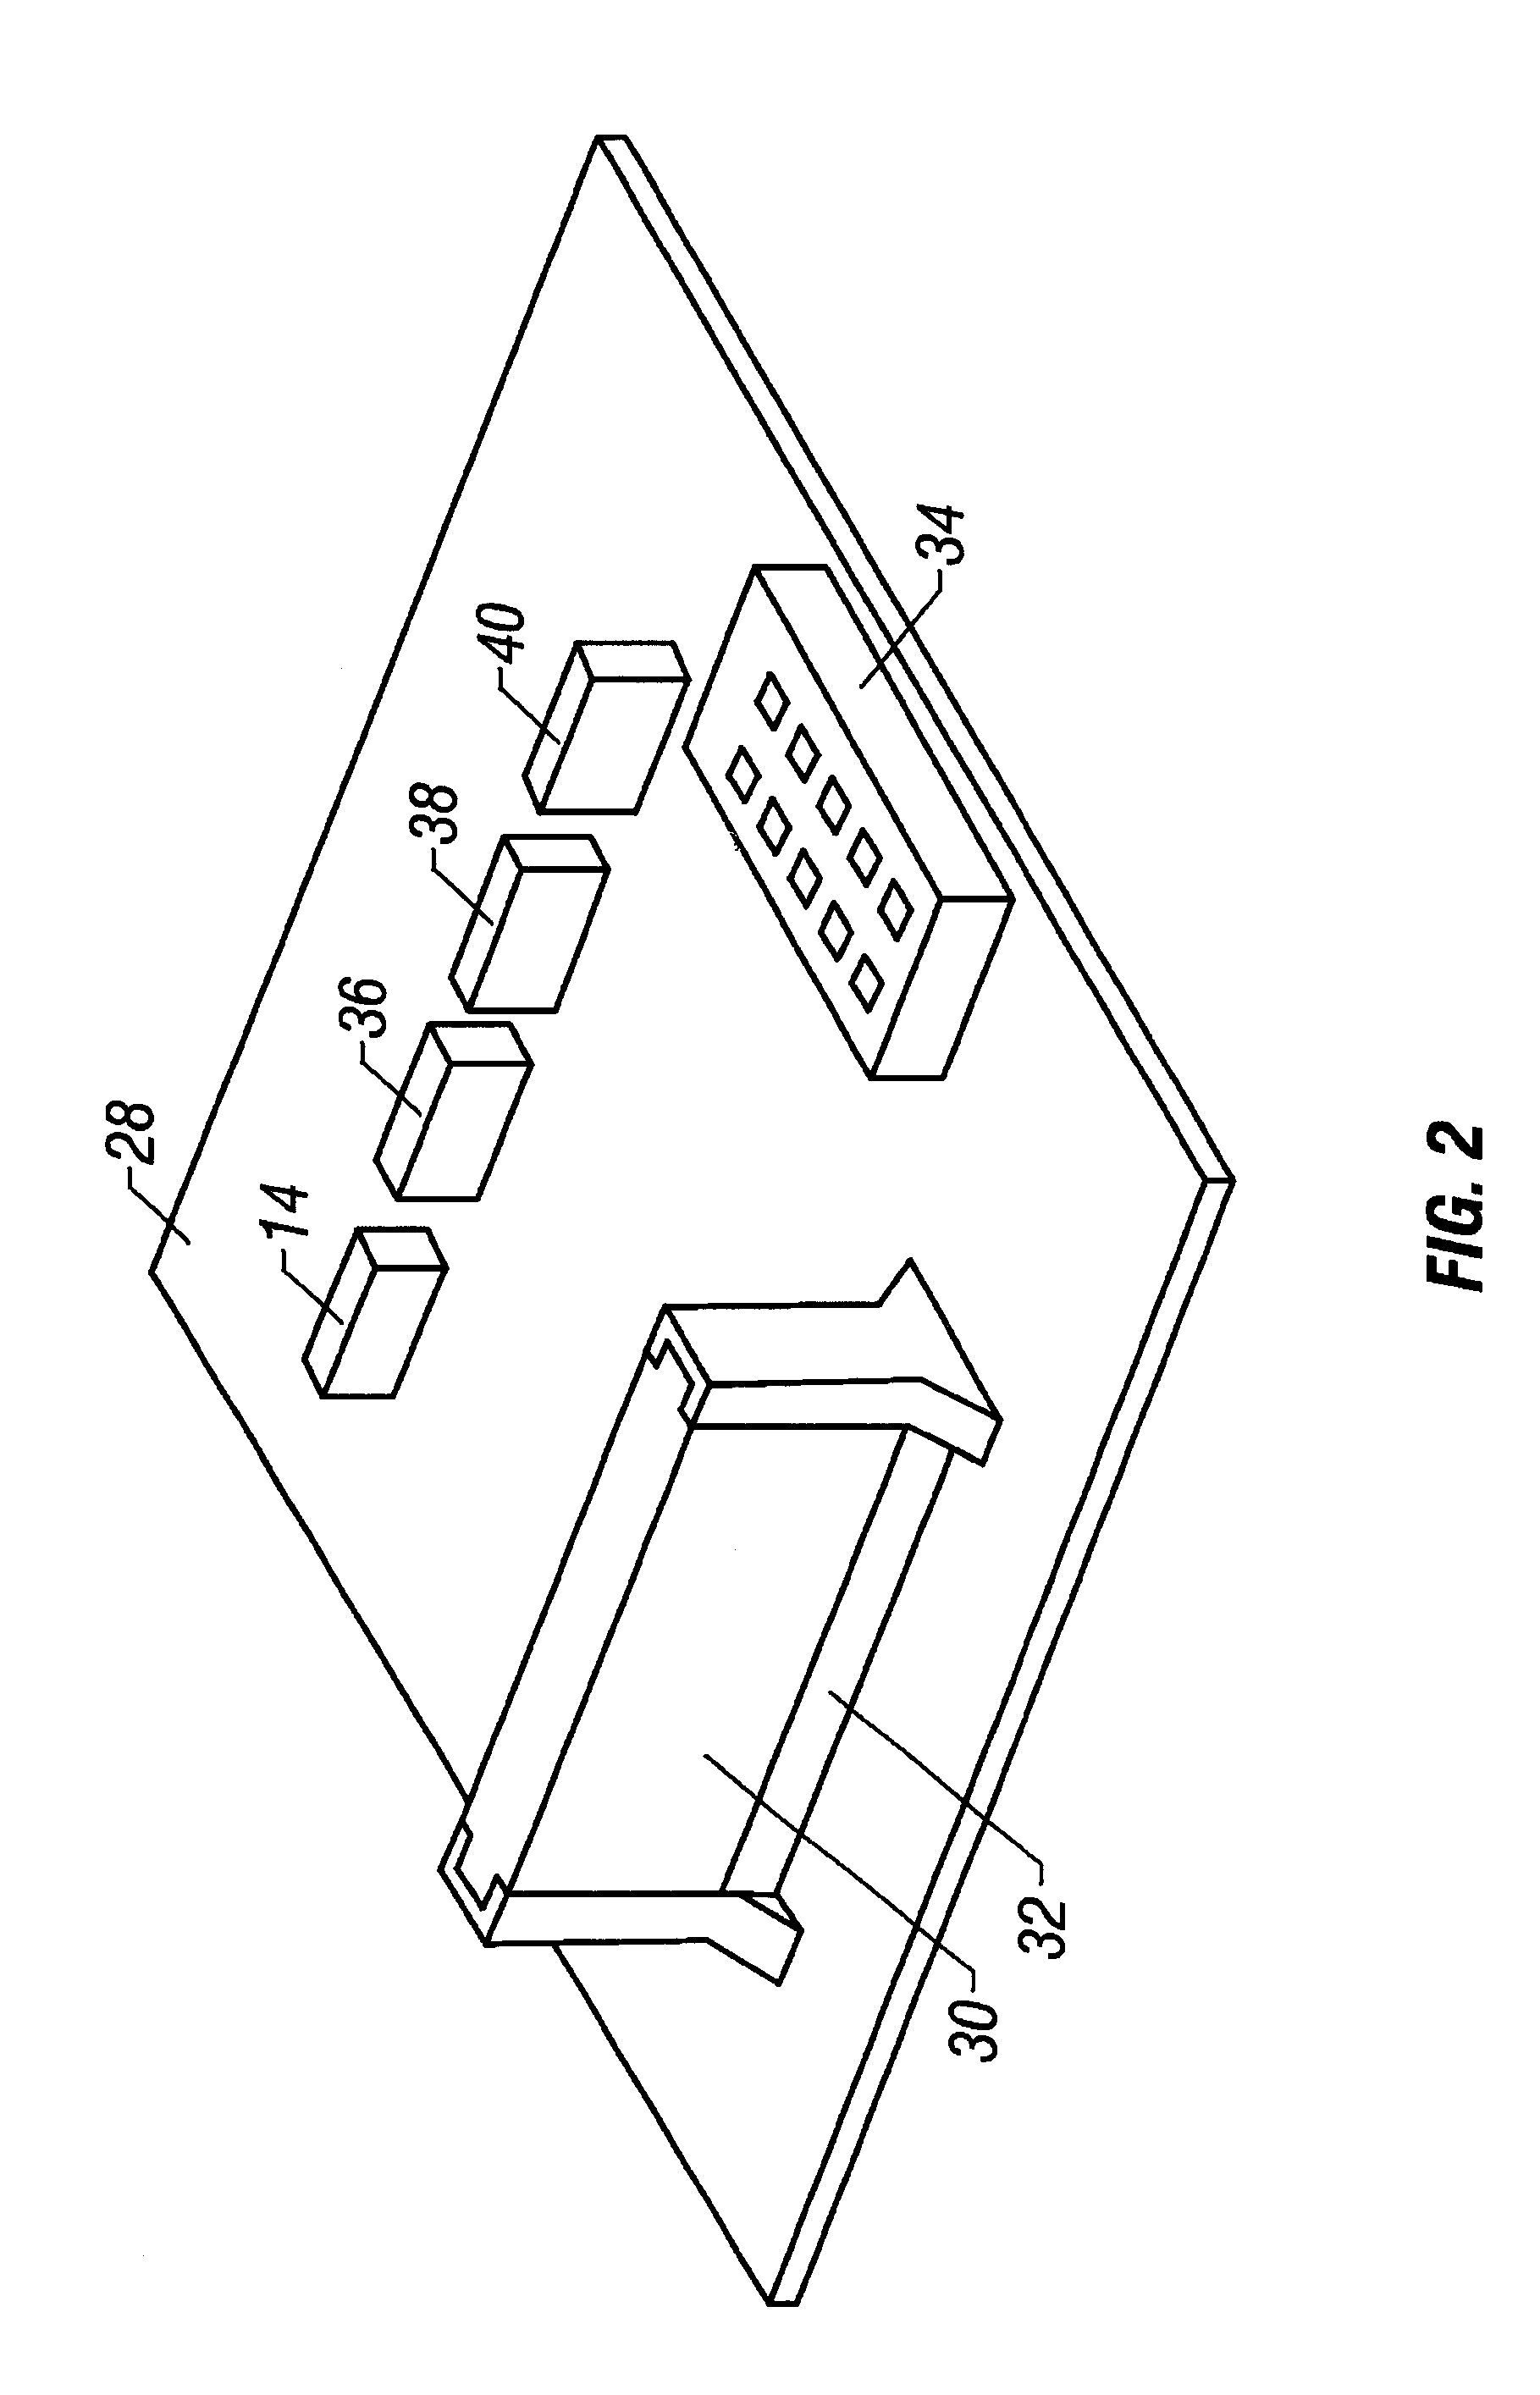 Apparatus and method for minimizing electromagnetic interference in microcomputing systems